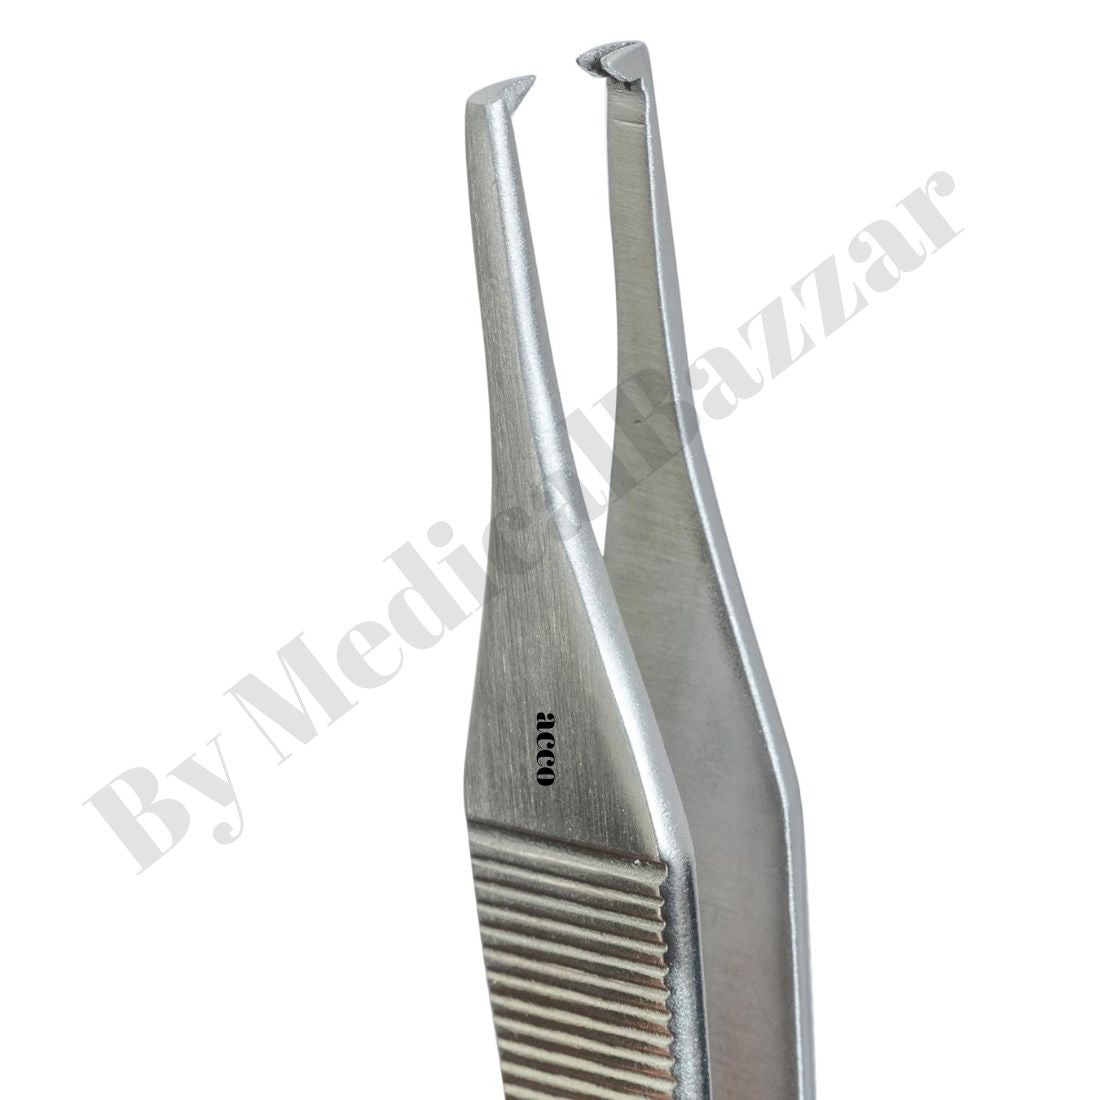 acco Adson Dissecting Forceps (Plain / Tooth)